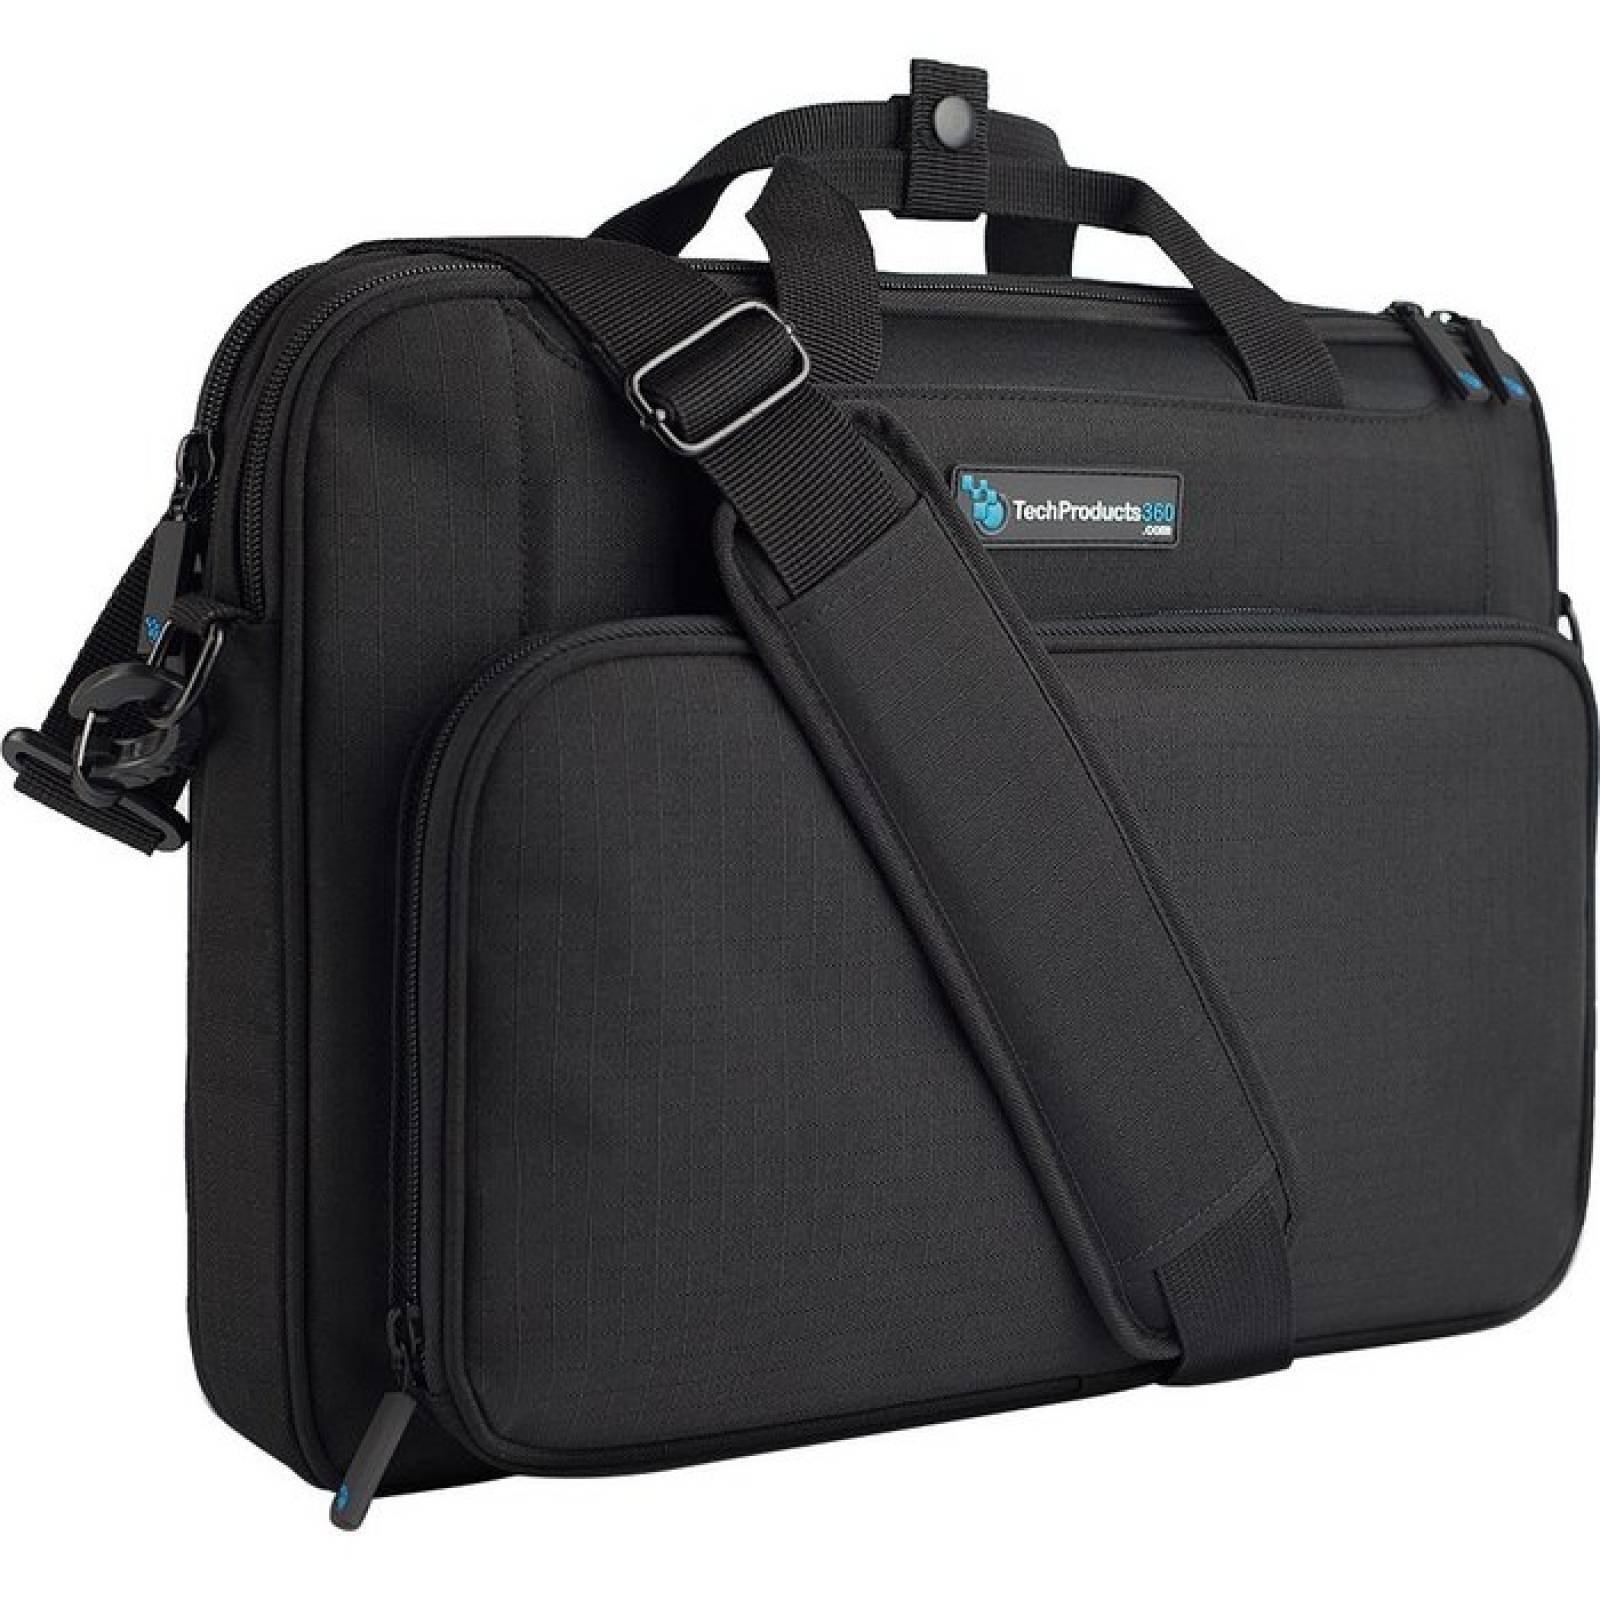 TechProducts360 Vault Carrying Case for 12 Notebook